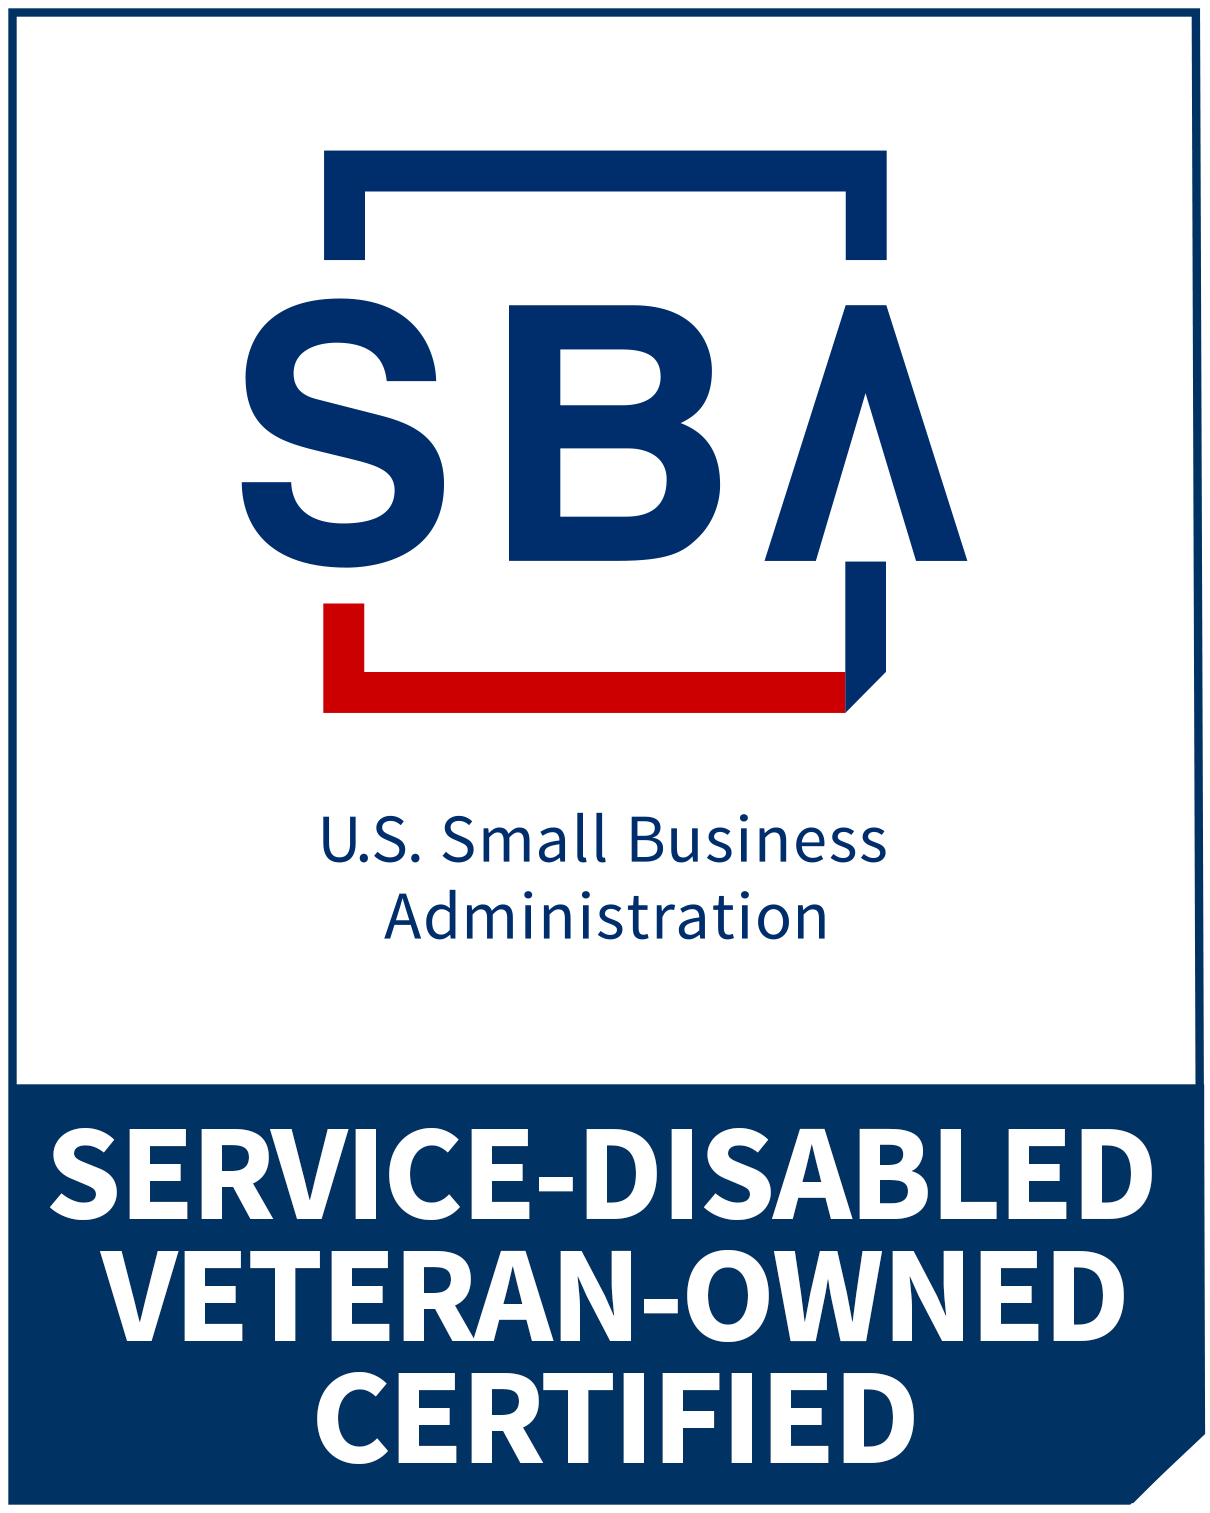 SBA Service-Disabled Veteran-Owned Certified Small Business.